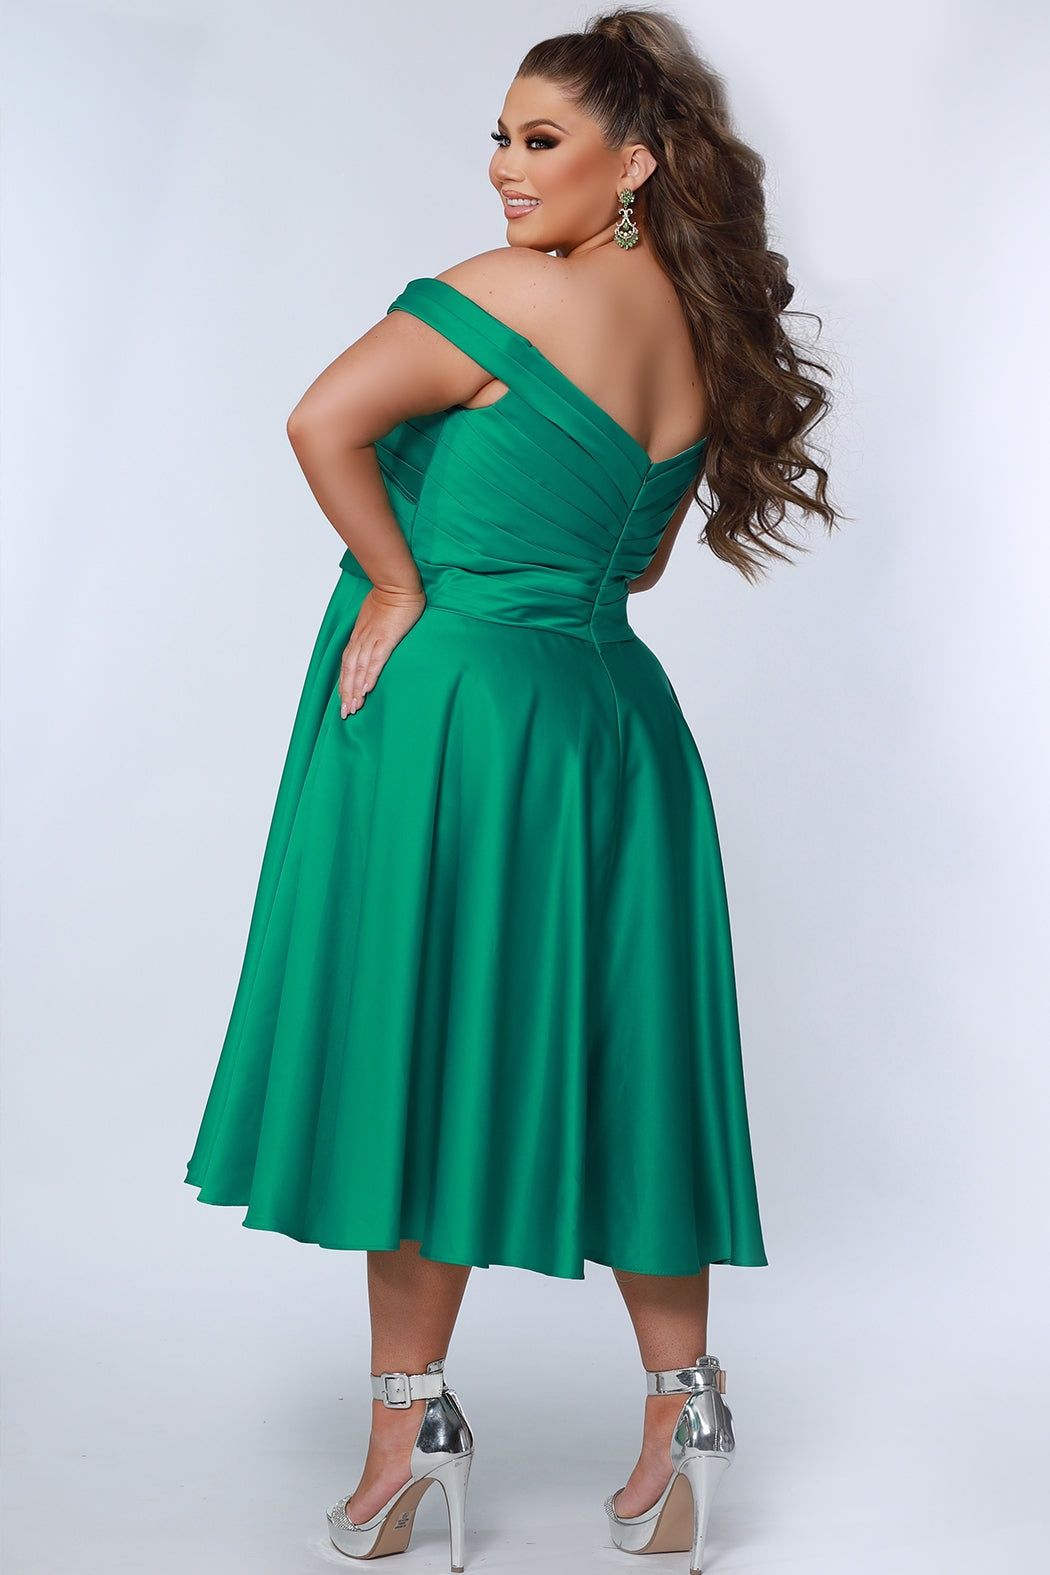 Style CE2301 Sydney's Closet Plus Size 38 Satin Emerald Black Cocktail Dress on Queenly